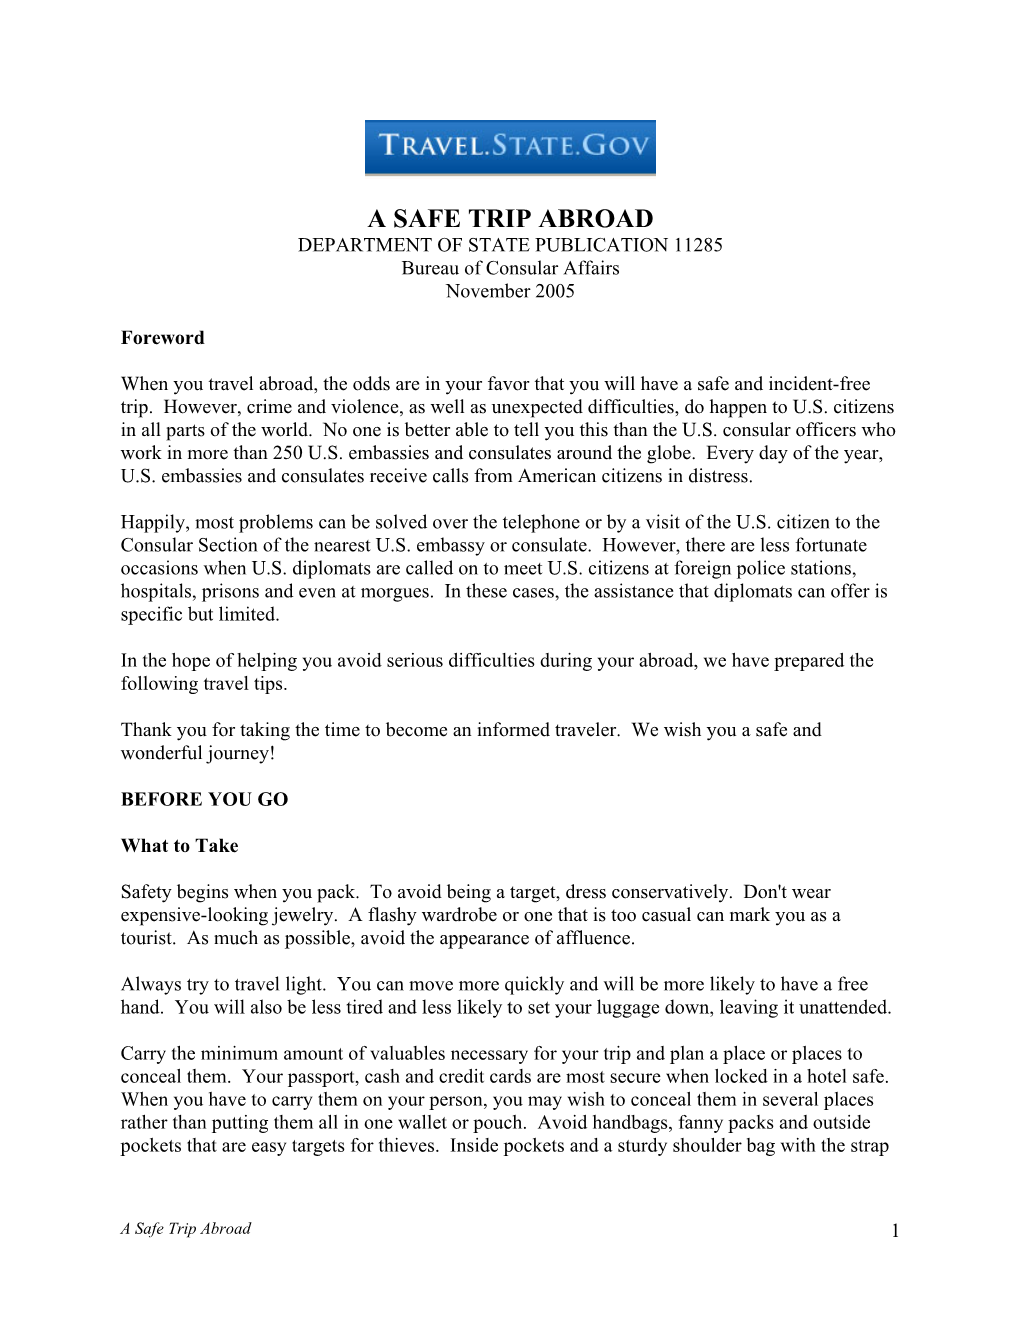 A SAFE TRIP ABROAD DEPARTMENT of STATE PUBLICATION 11285 Bureau of Consular Affairs November 2005